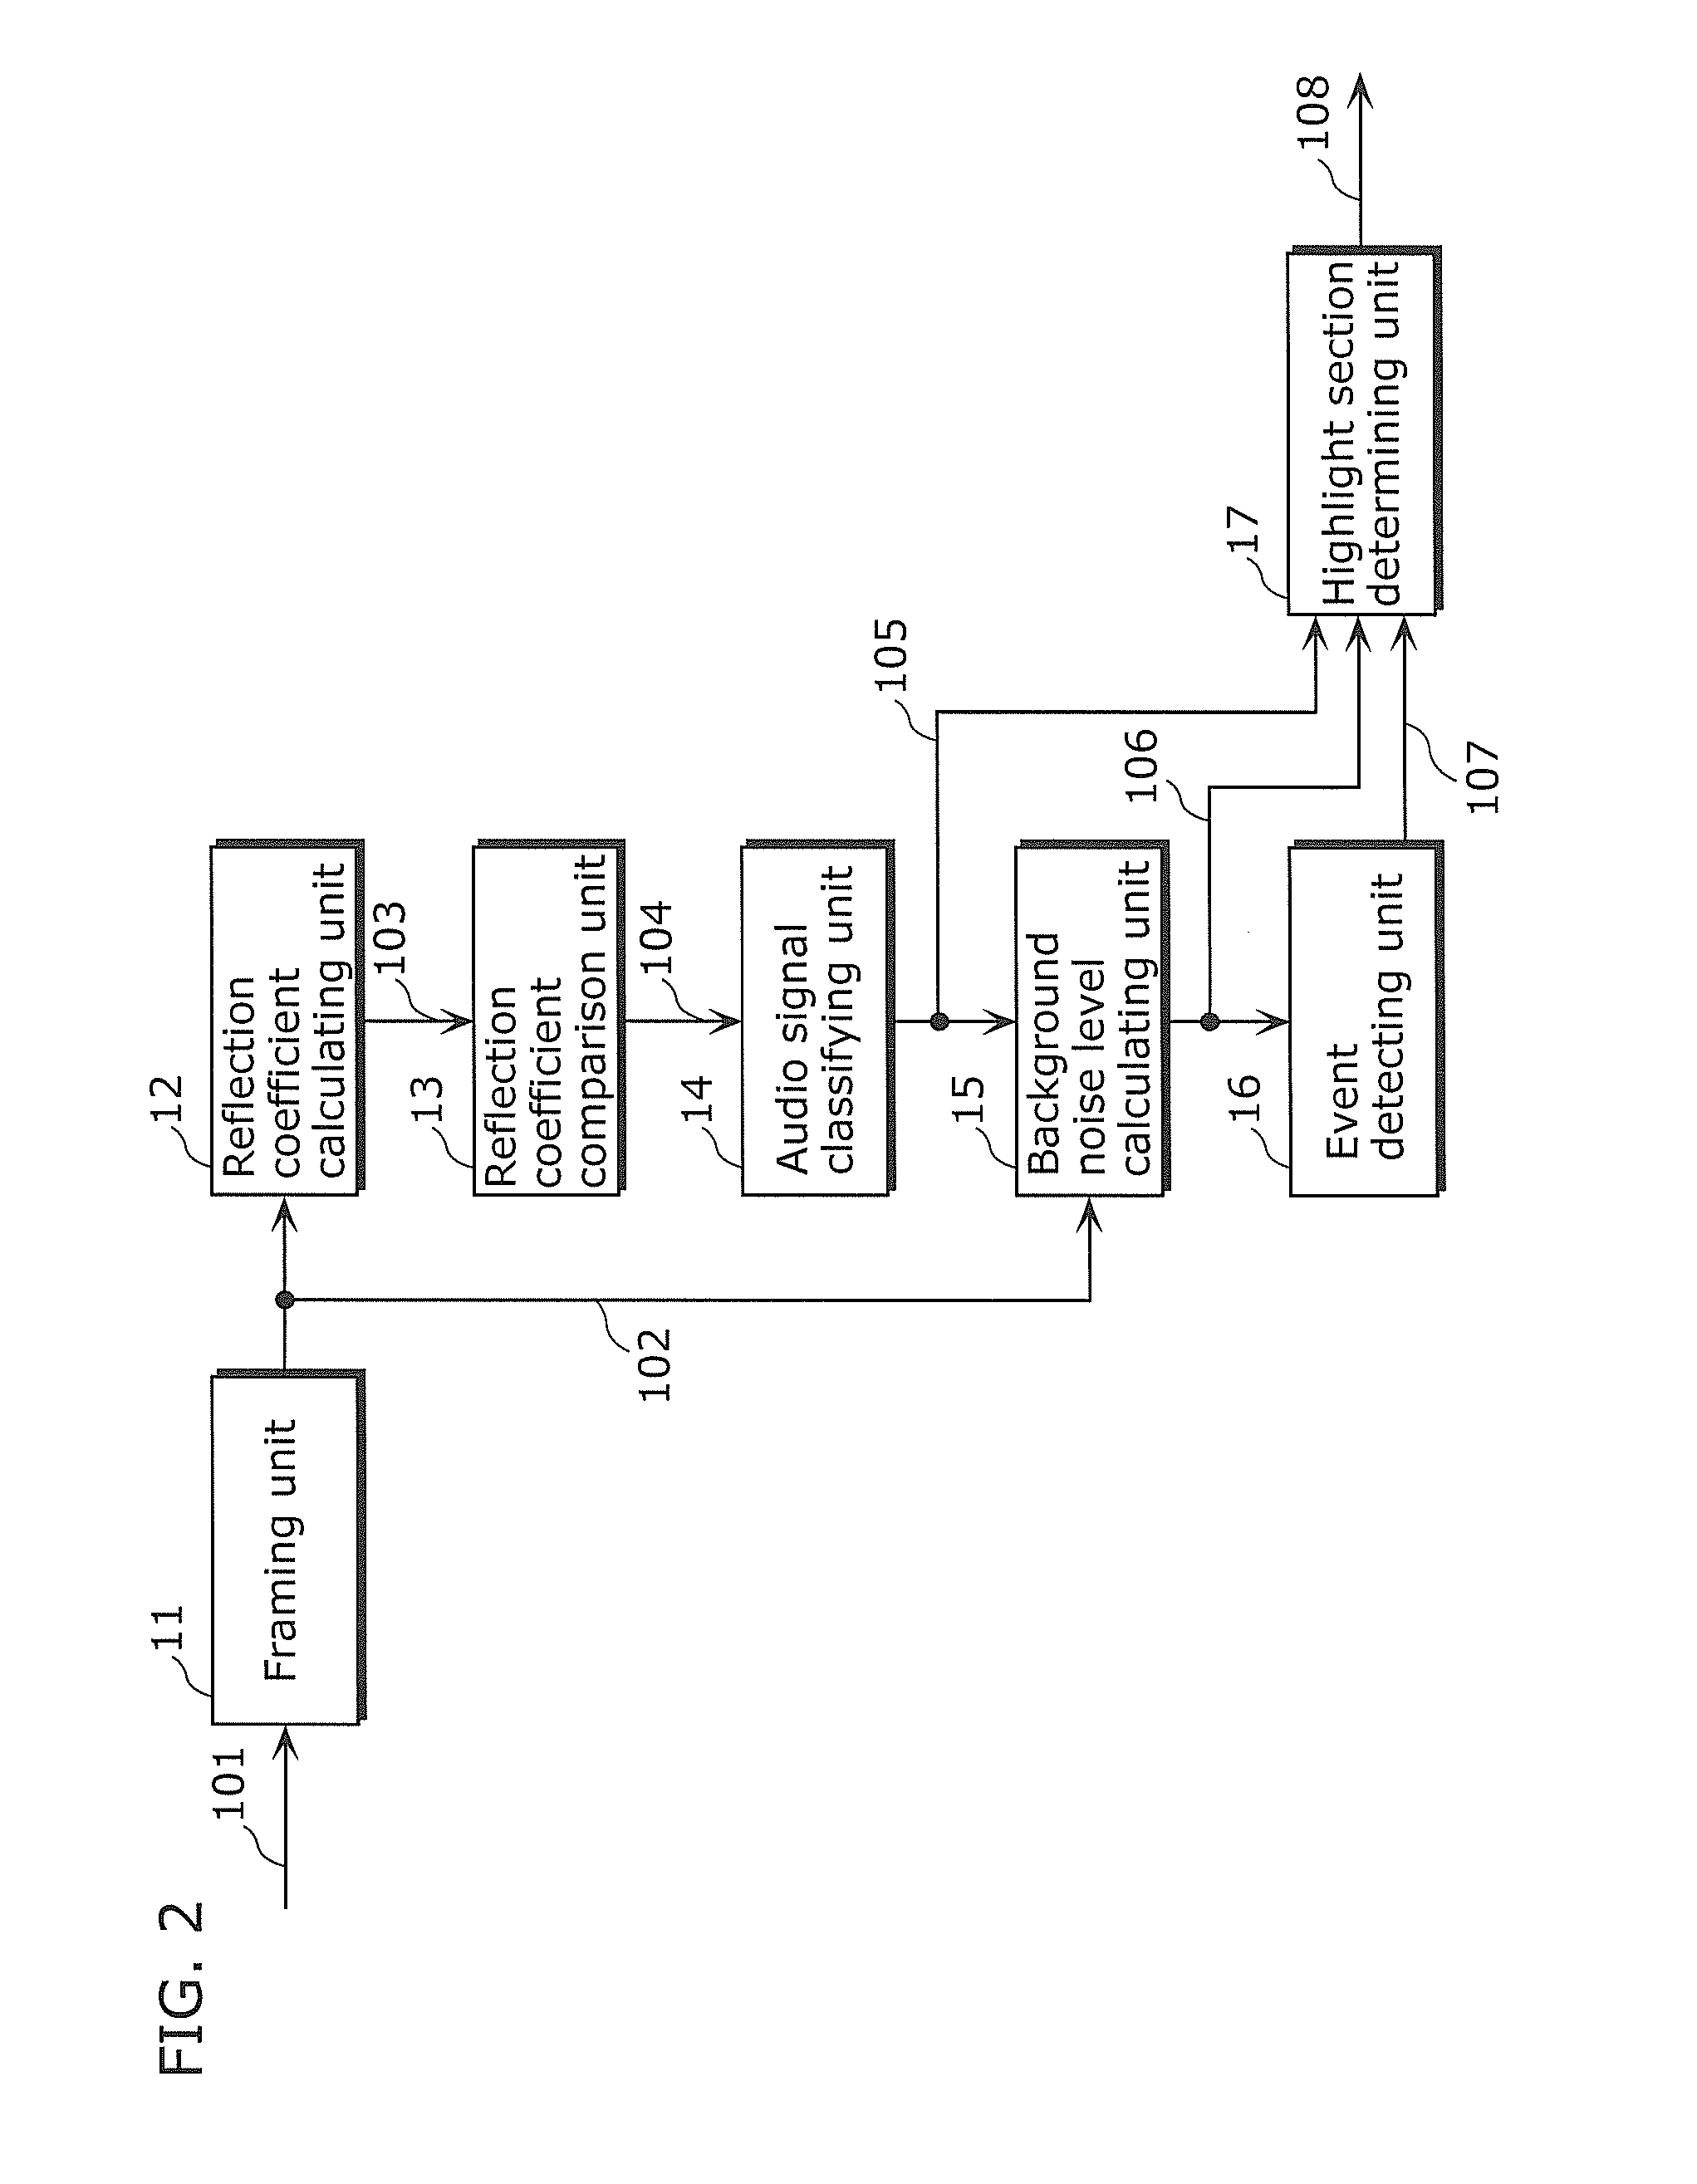 Acoustic signal processing device and method